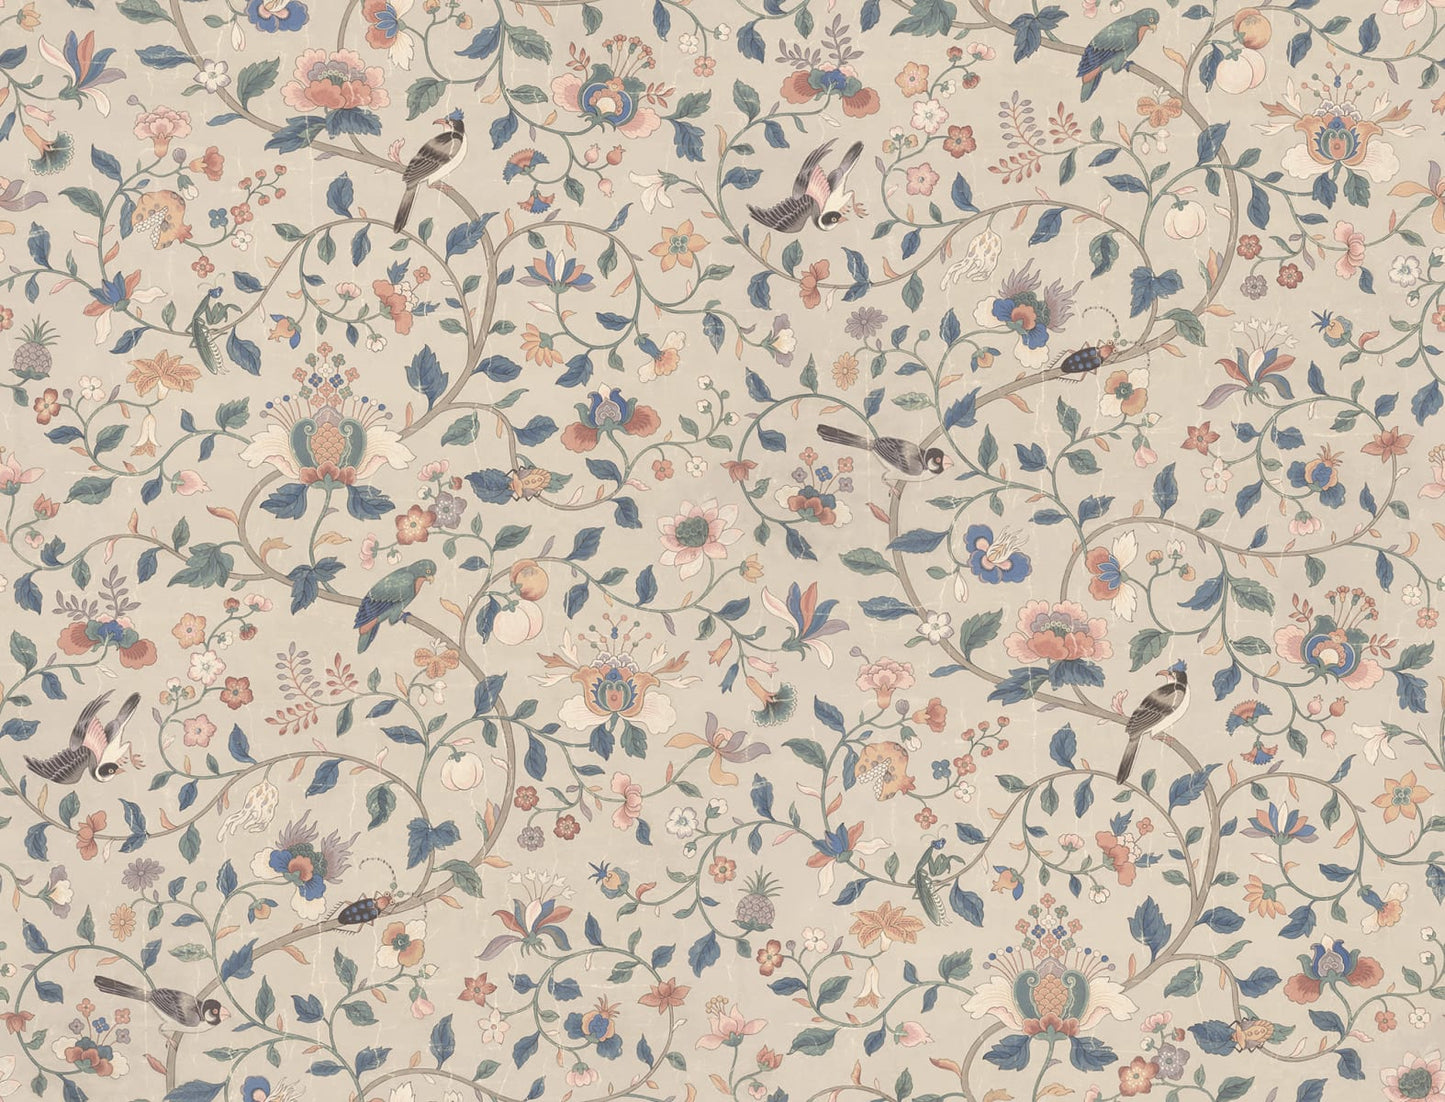 Hedda wallpaper has an exquisitely detailed older hand-painted original, which, with its multifaceted colors, can match many different interiors.